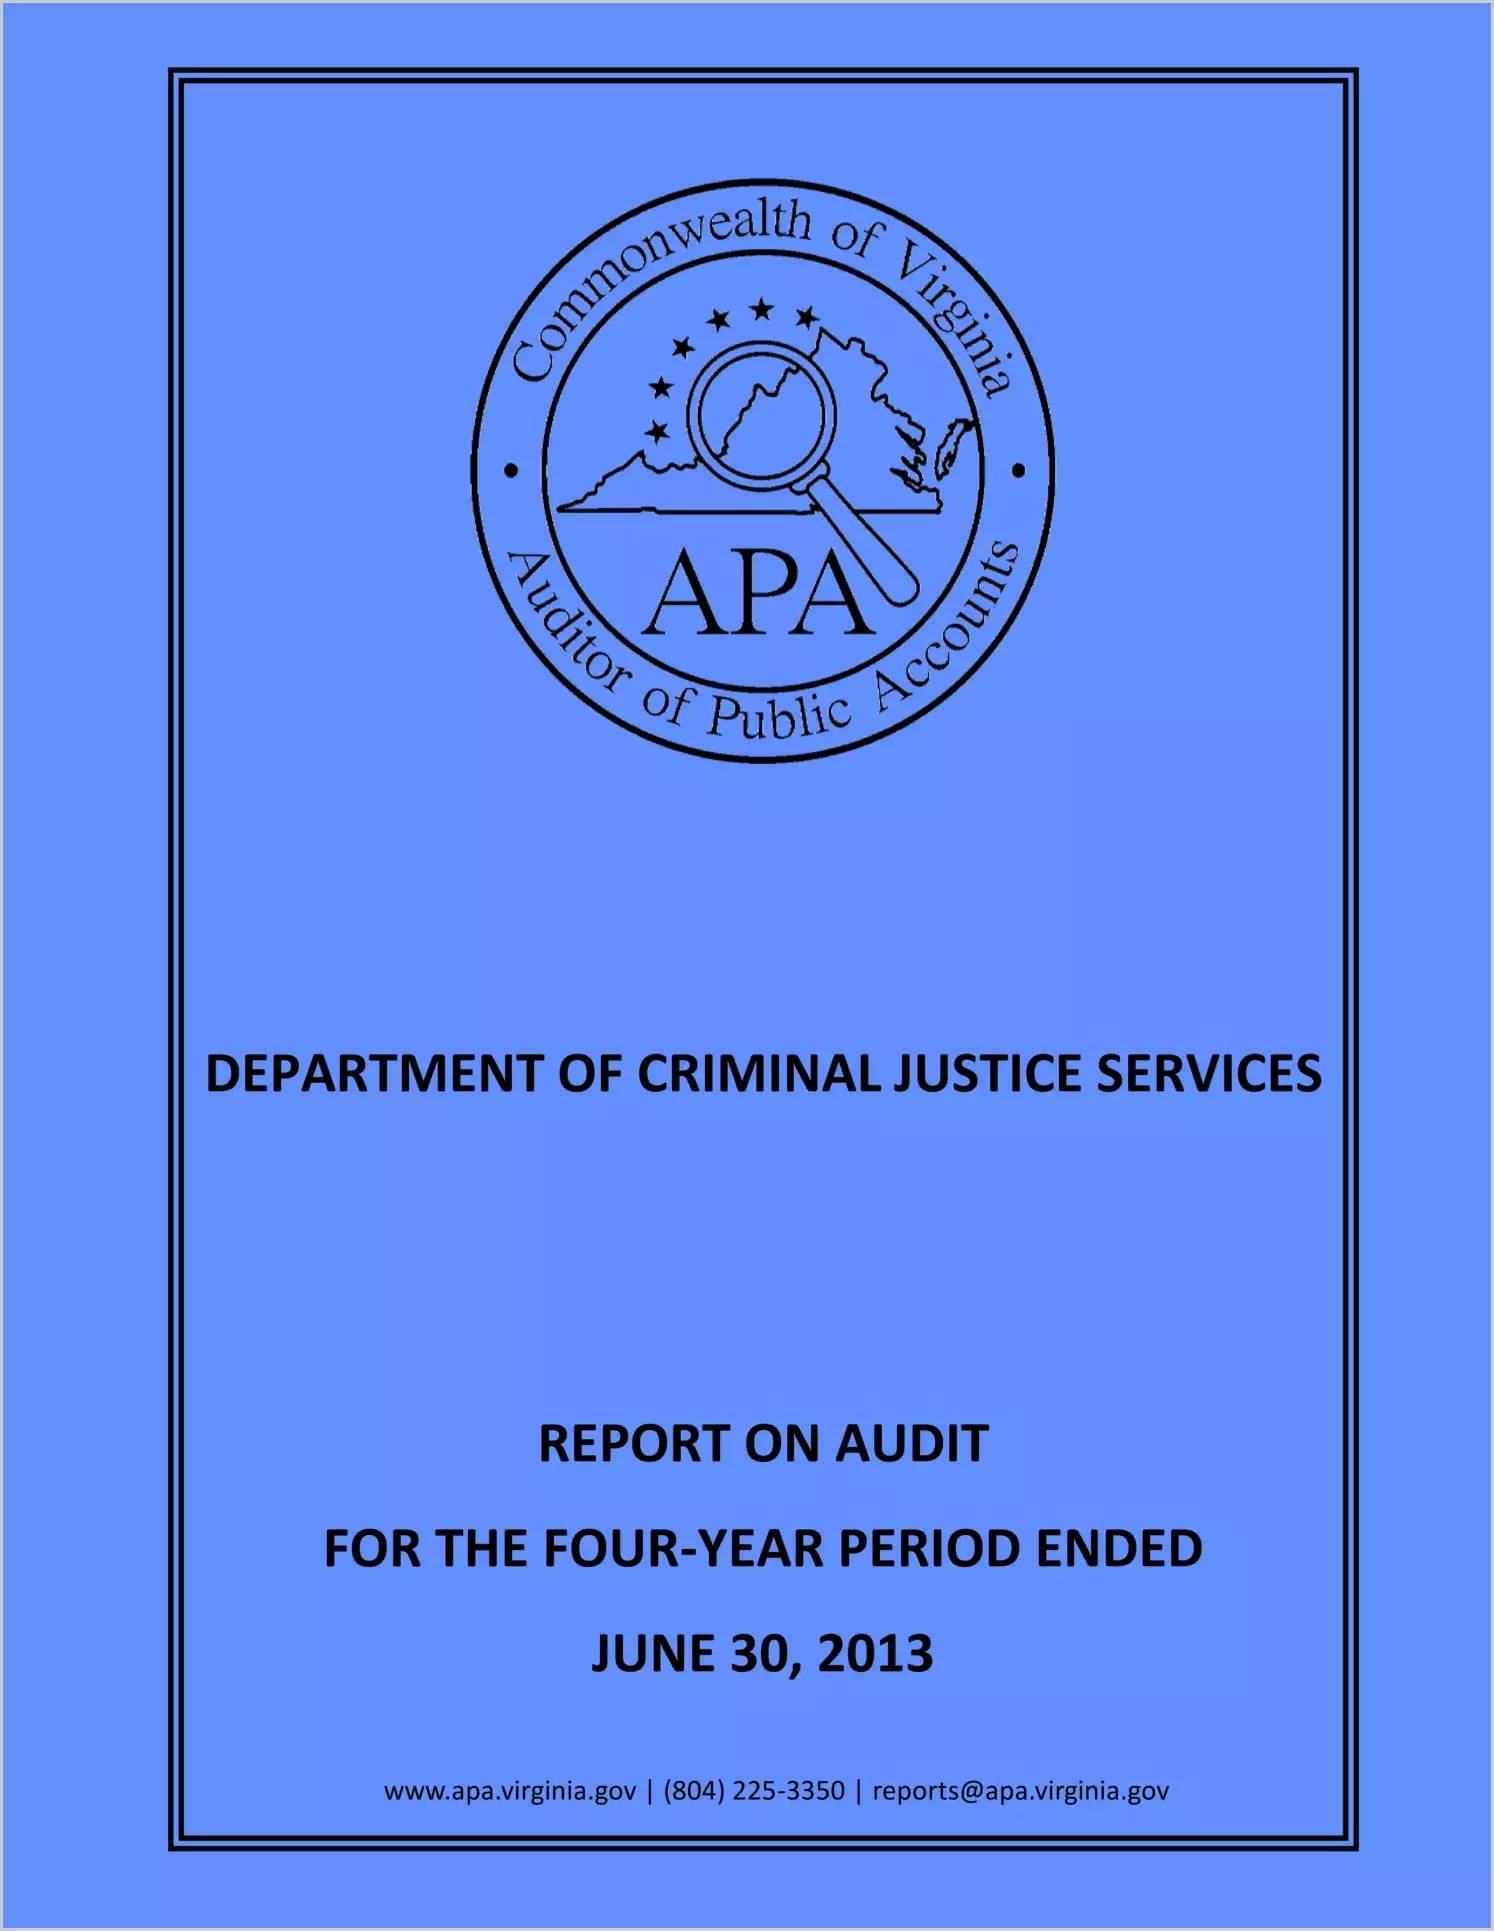 Department of Criminal Justice Services Report for the four-year period ended June 30, 2013